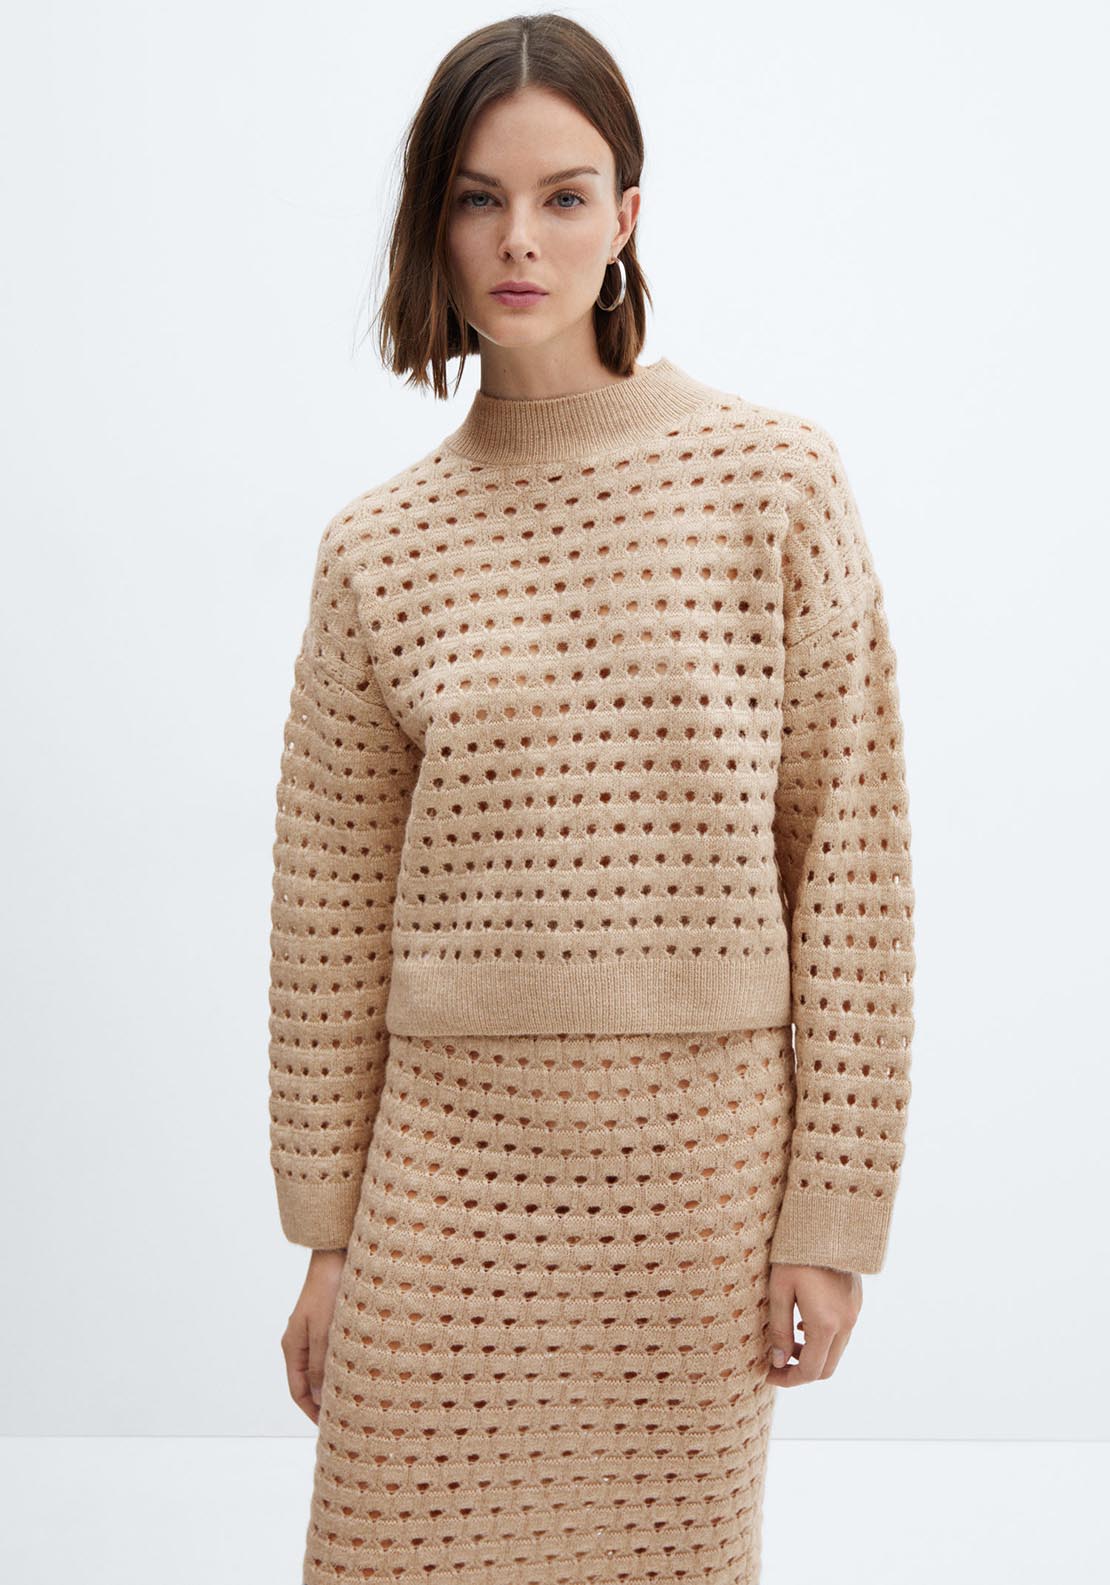 Mango Perkins neck knitted sweater 1 Shaws Department Stores